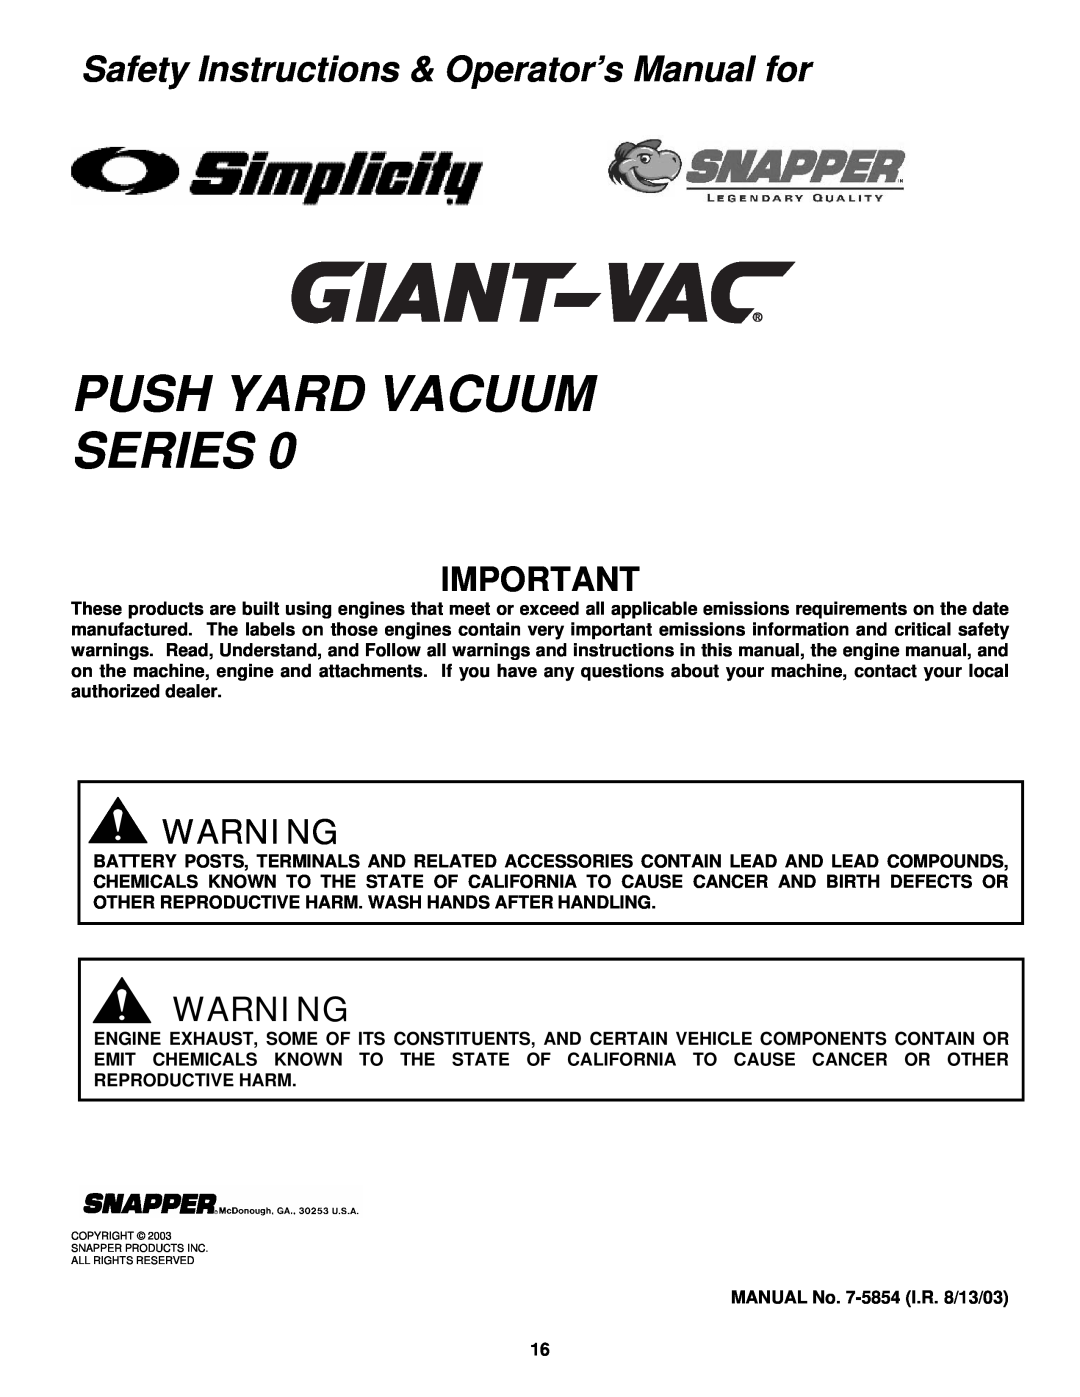 Snapper SV25650B important safety instructions Push Yard Vacuum Series, Safety Instructions & Operator’s Manual for 